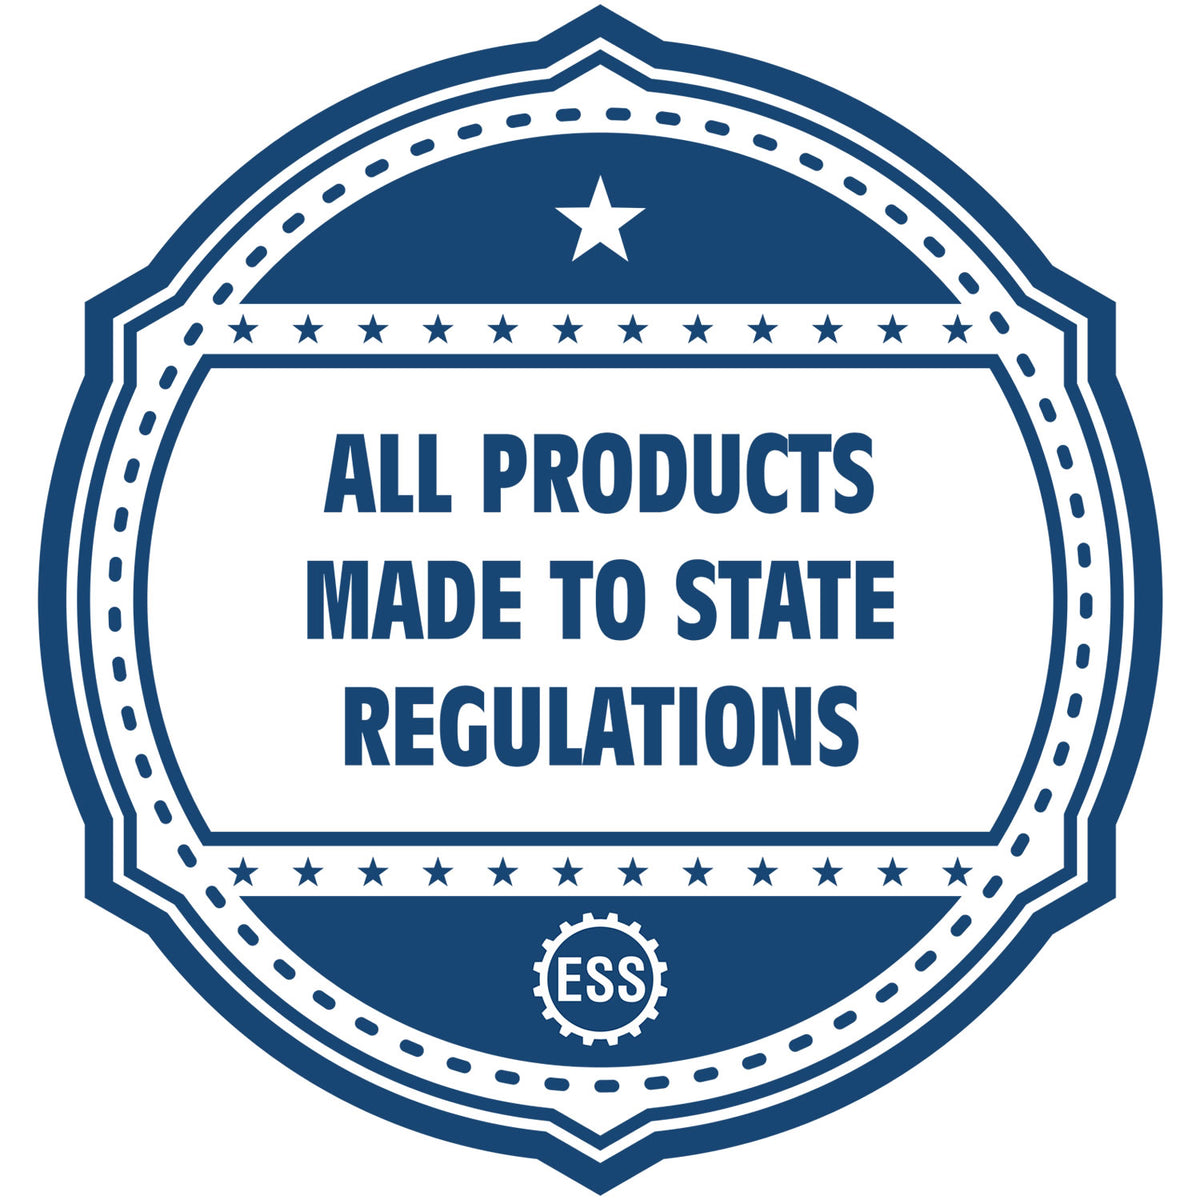 A blue icon or badge for the Slim Pre-Inked District of Columbia Professional Geologist Seal Stamp showing that this product is made in compliance with state regulations.